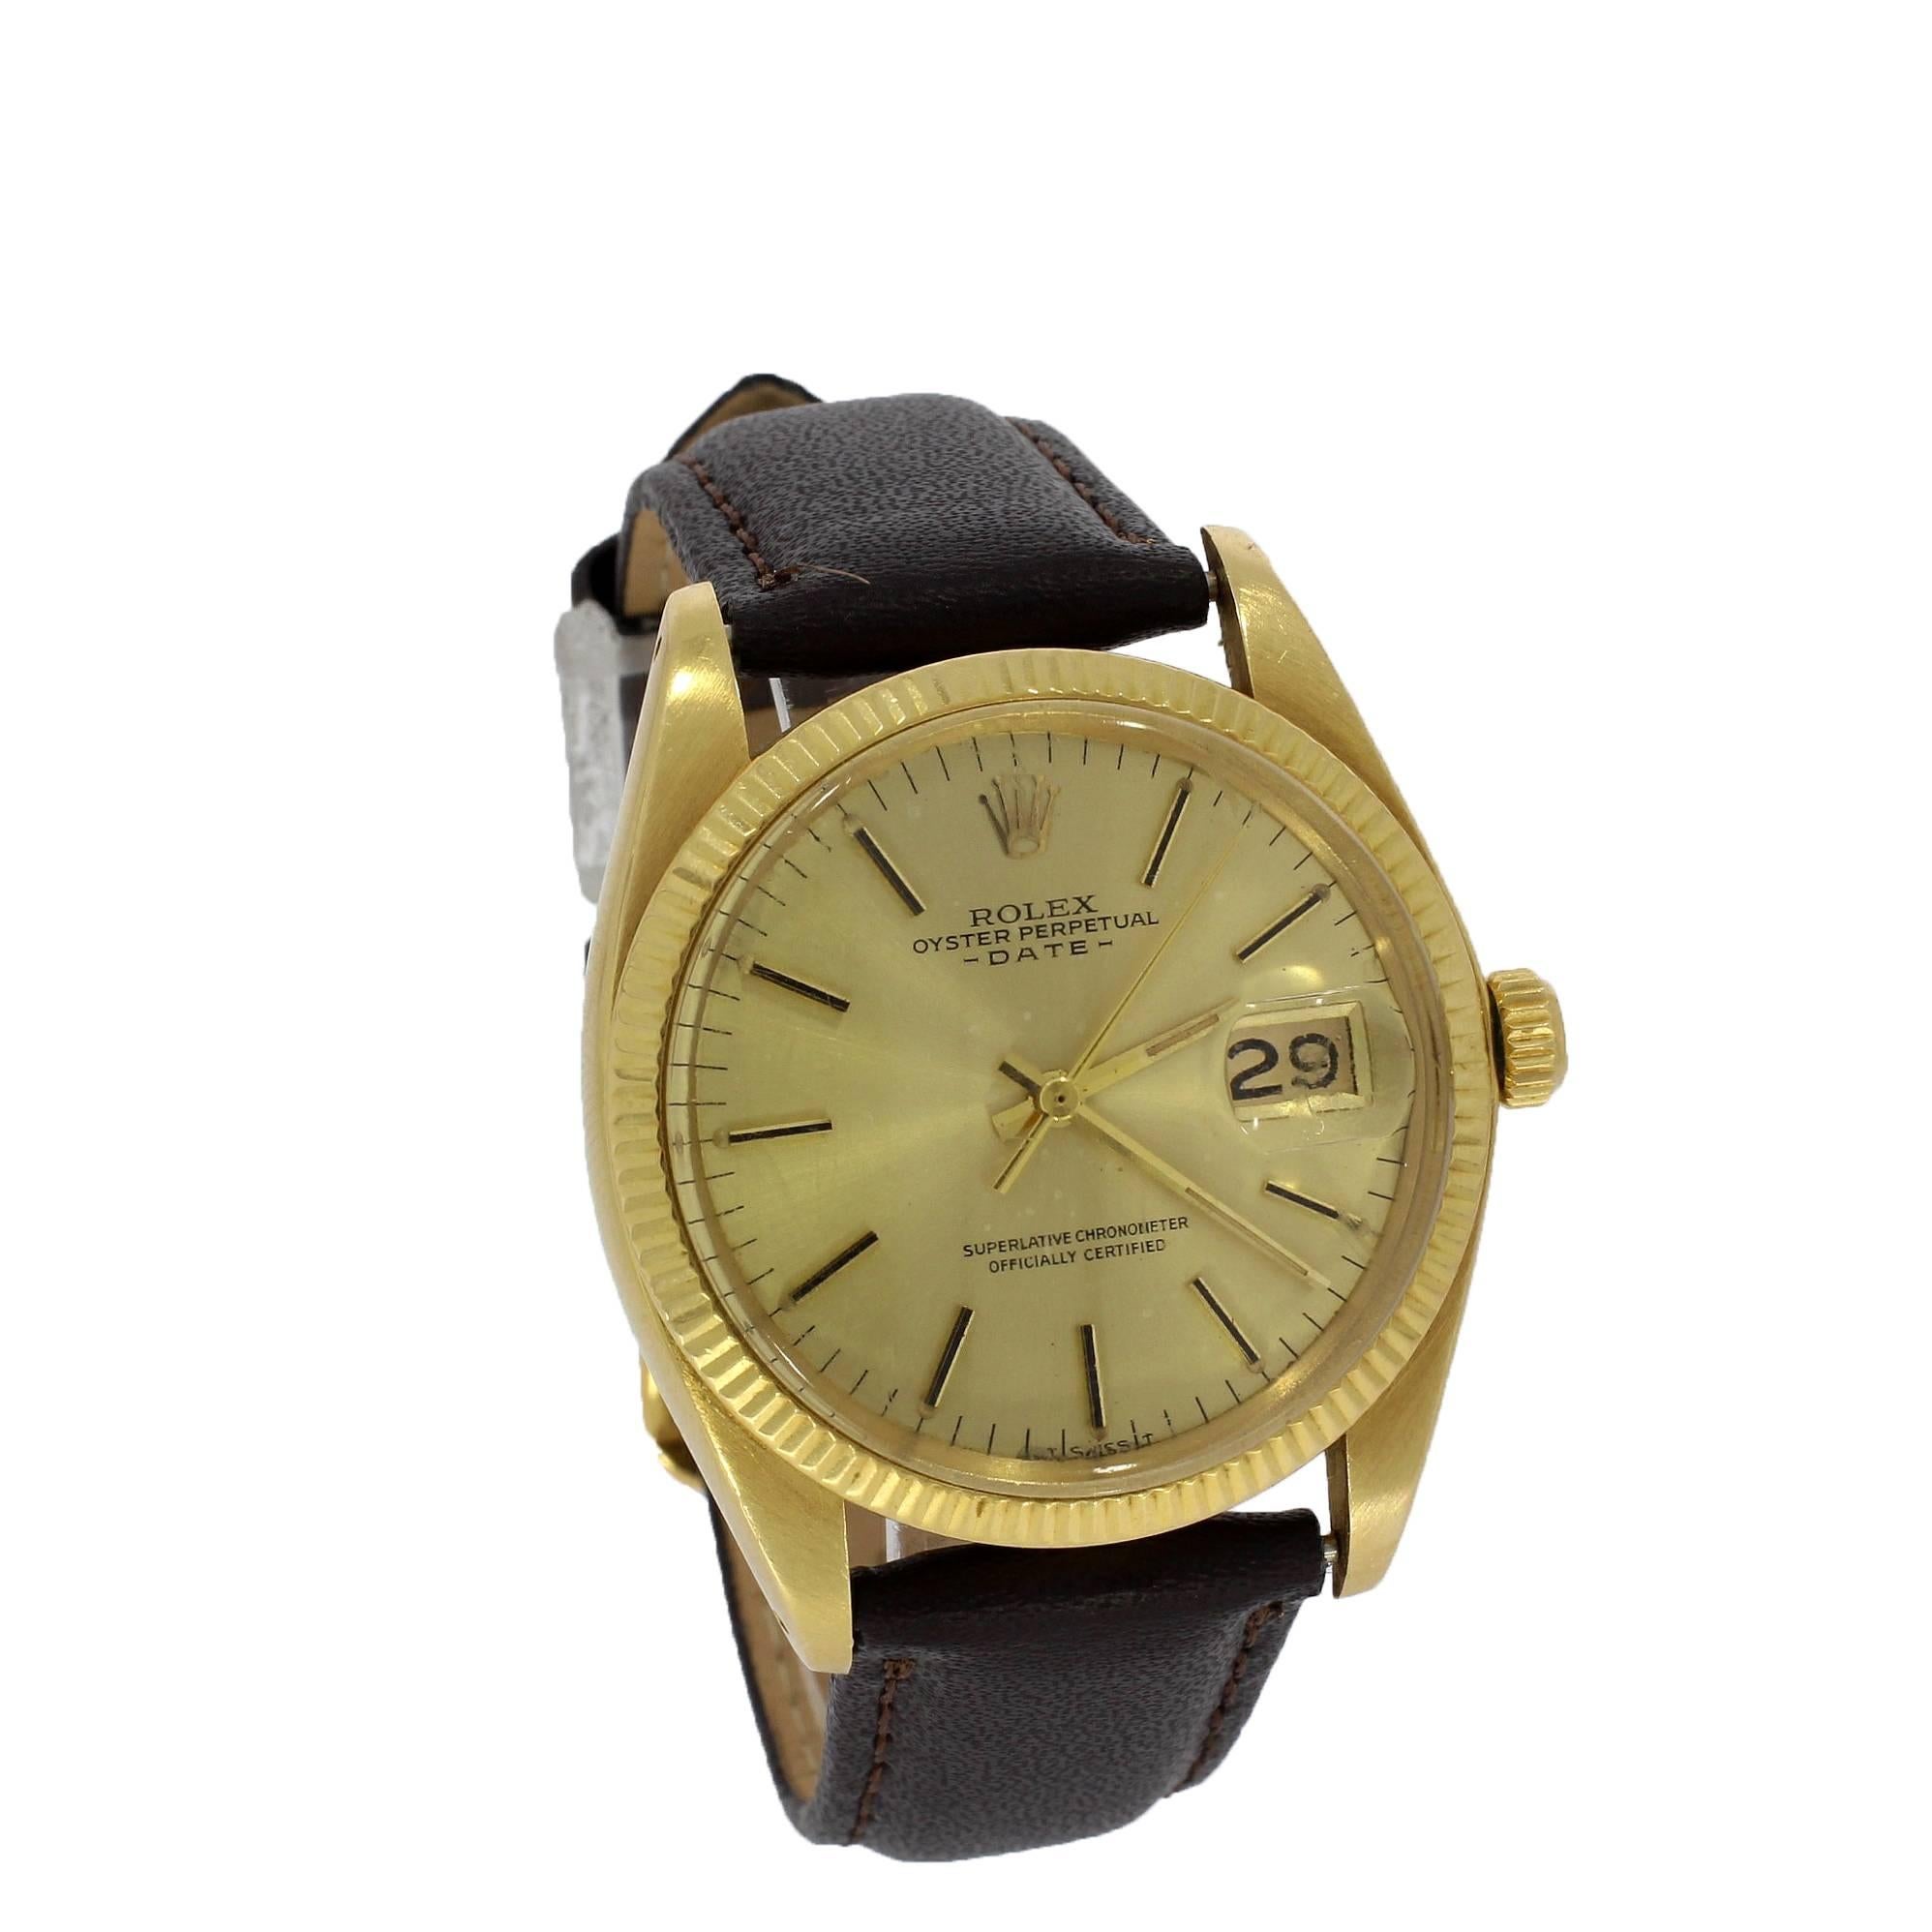 Rolex Yellow Gold Date Calibre 1570 Wristwatch Ref 1503, 1977 For Sale 5